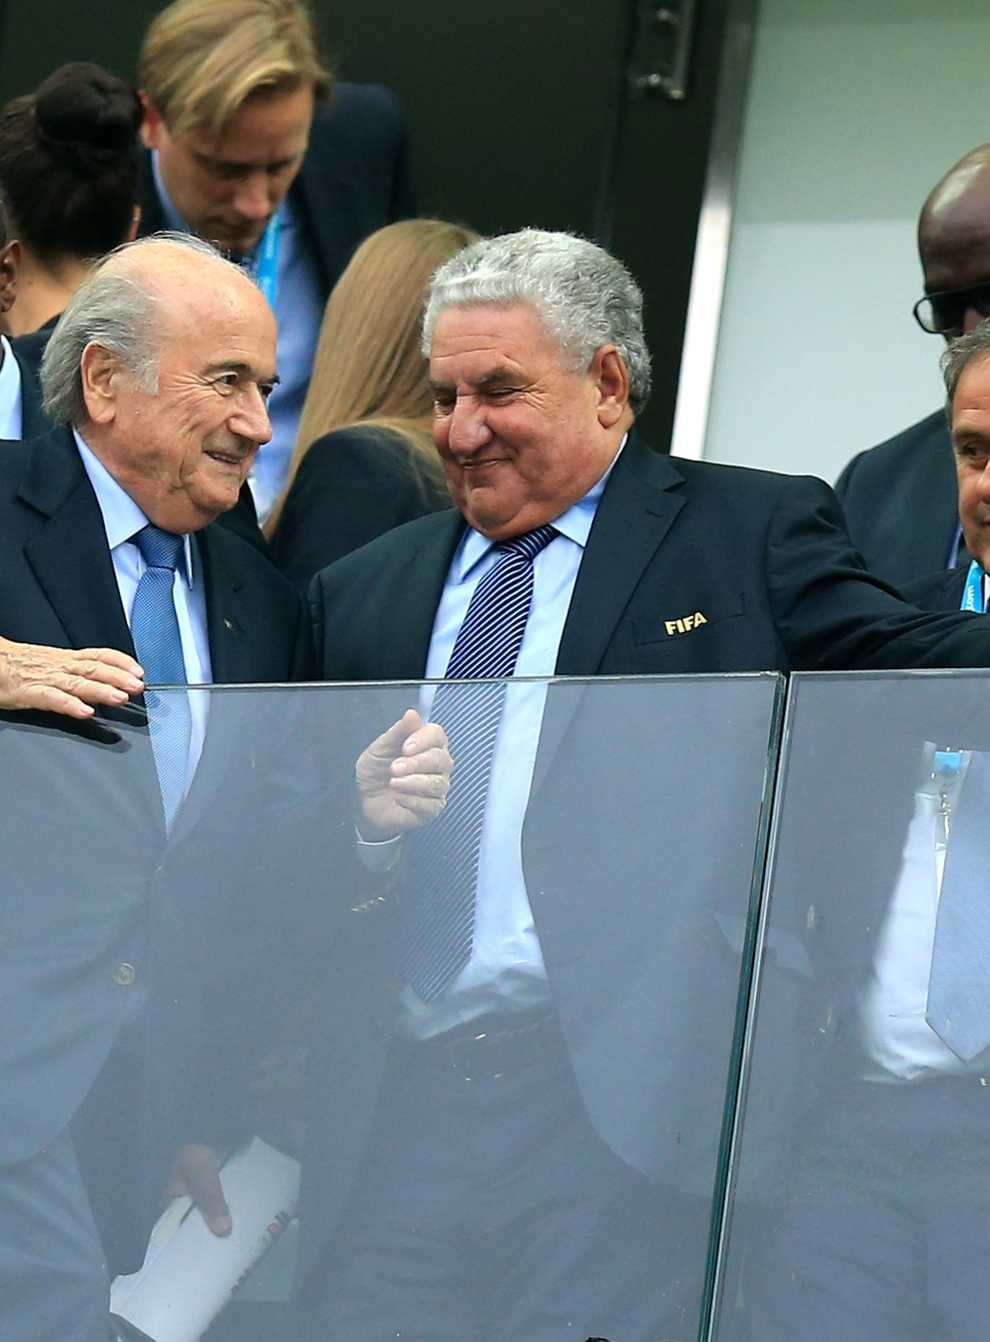 Sepp Blatter, front left, and Michel Platini, front row right, face trial in Switzerland in June (Mike Egerton/PA)